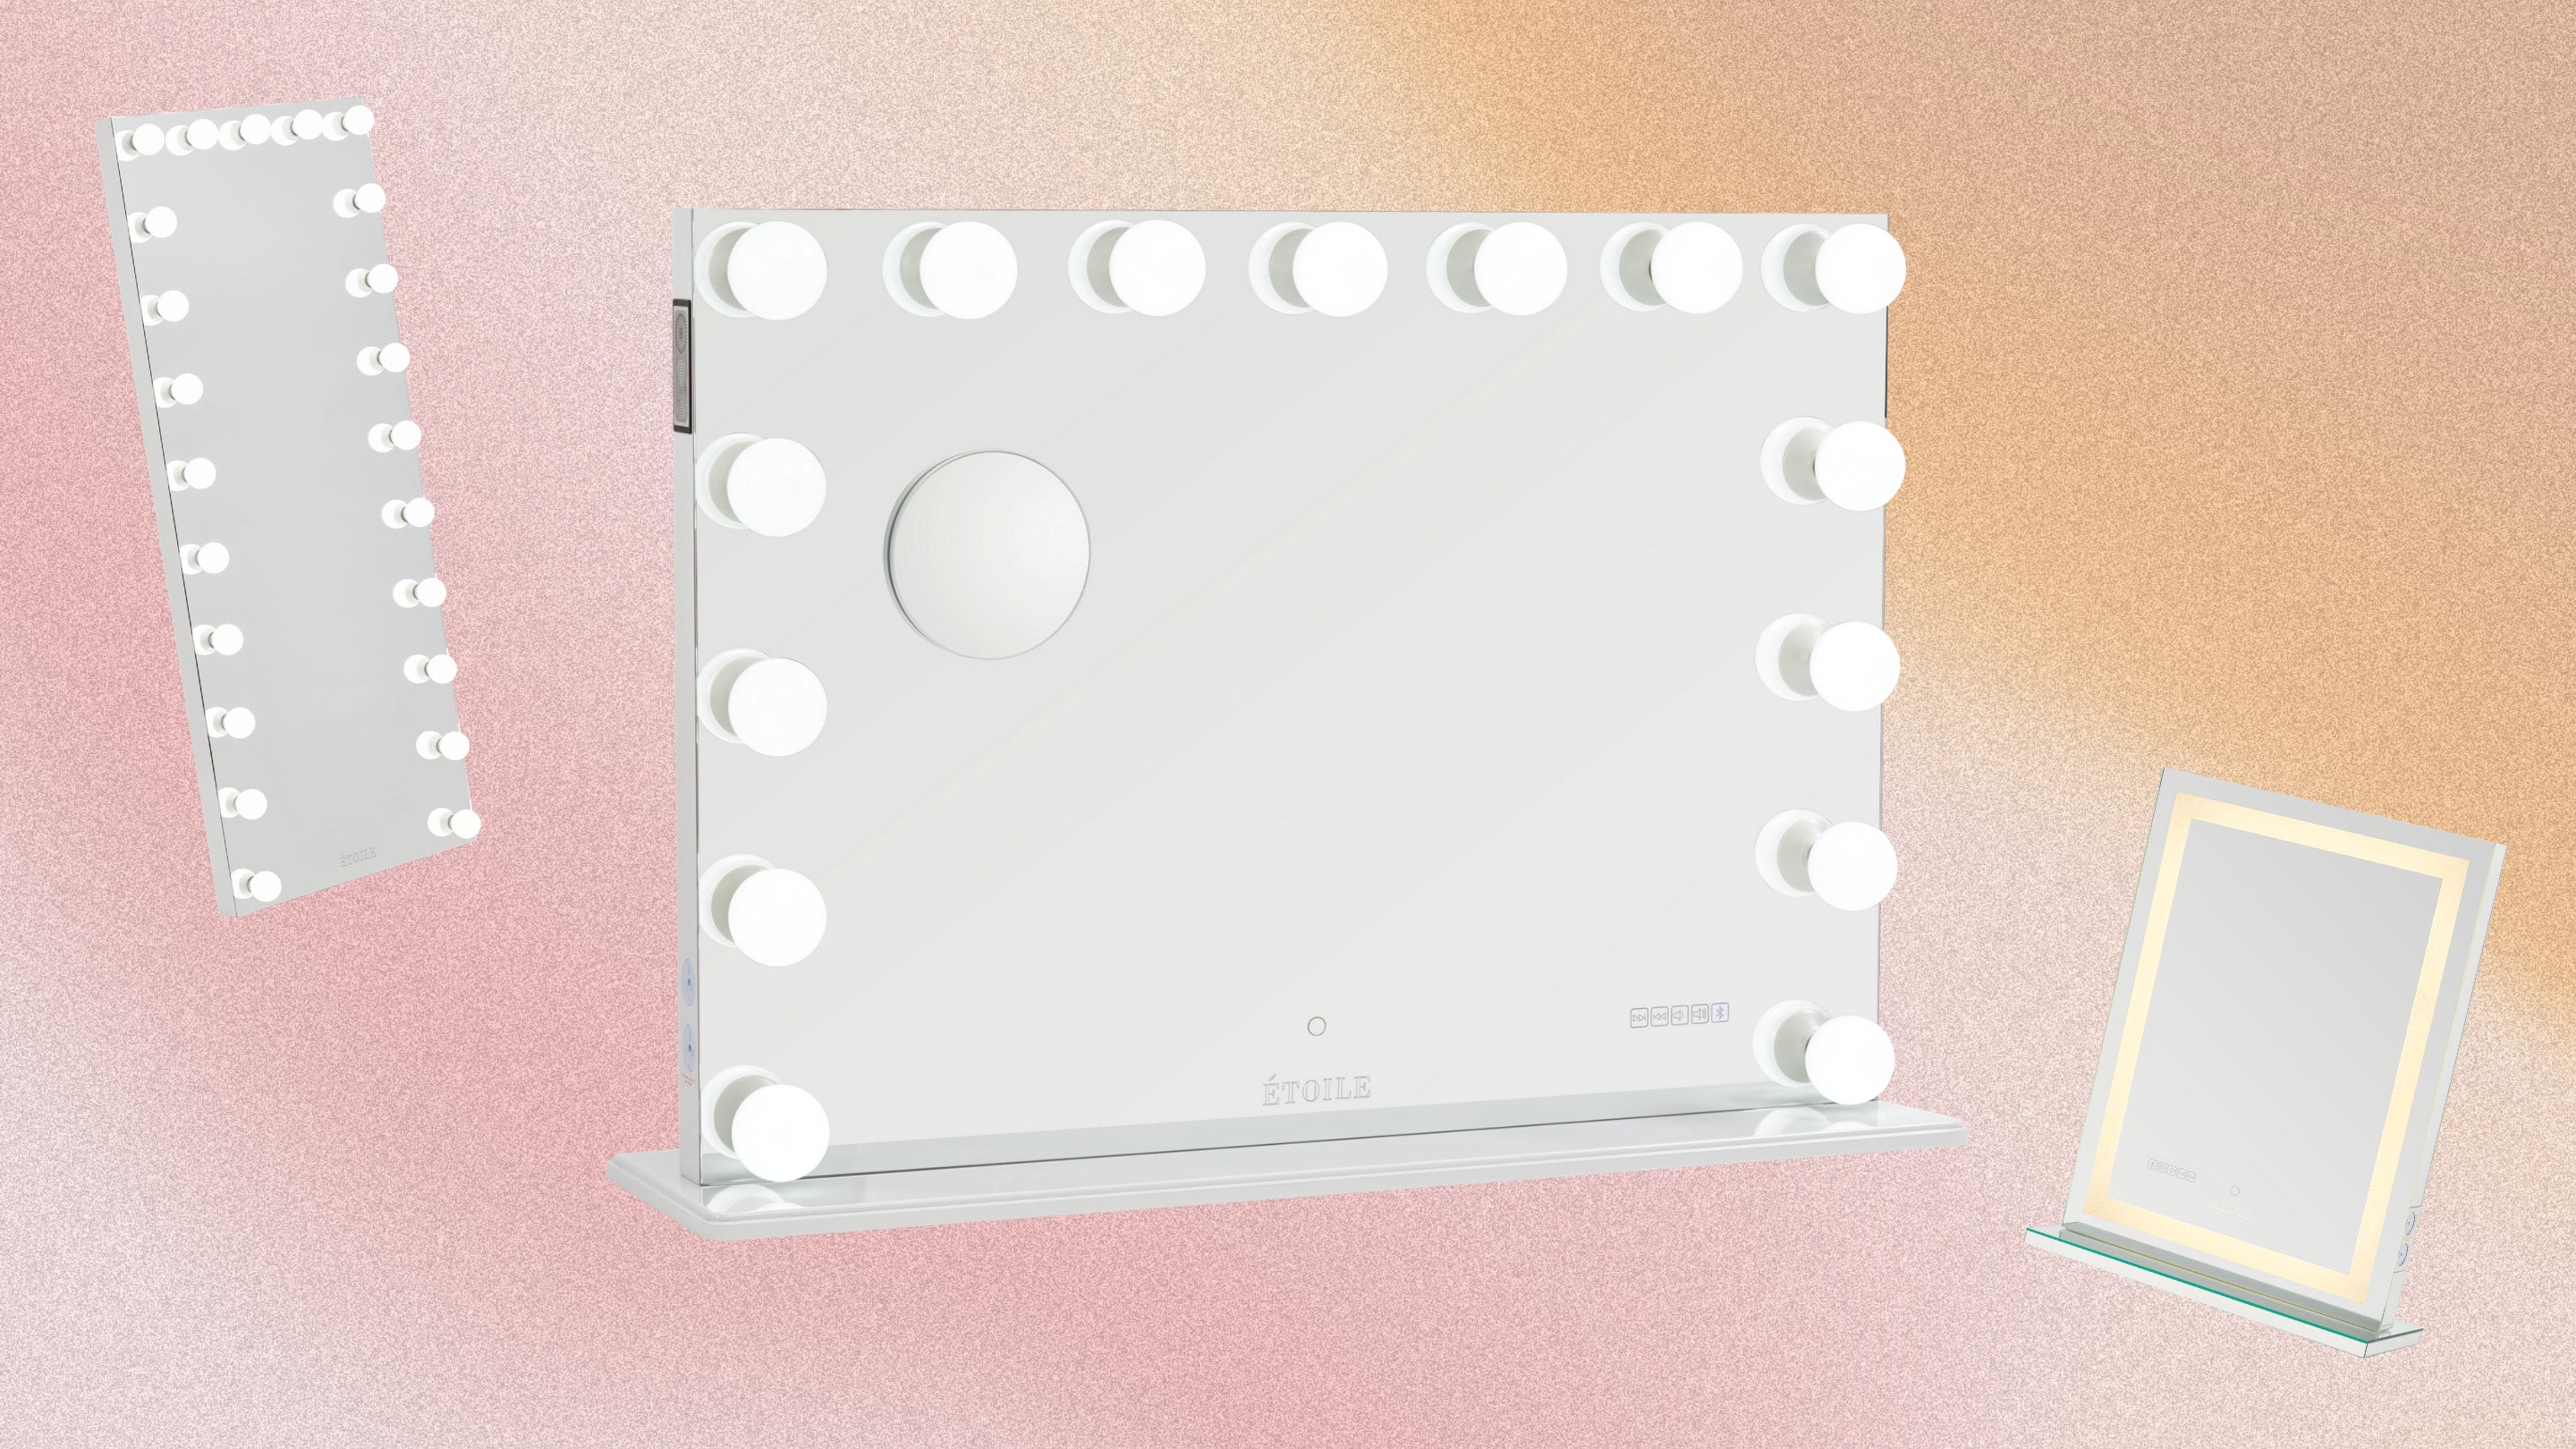 5 Makeup Vanity Mirror Ideas, and 4 to Add To Cart in 2021